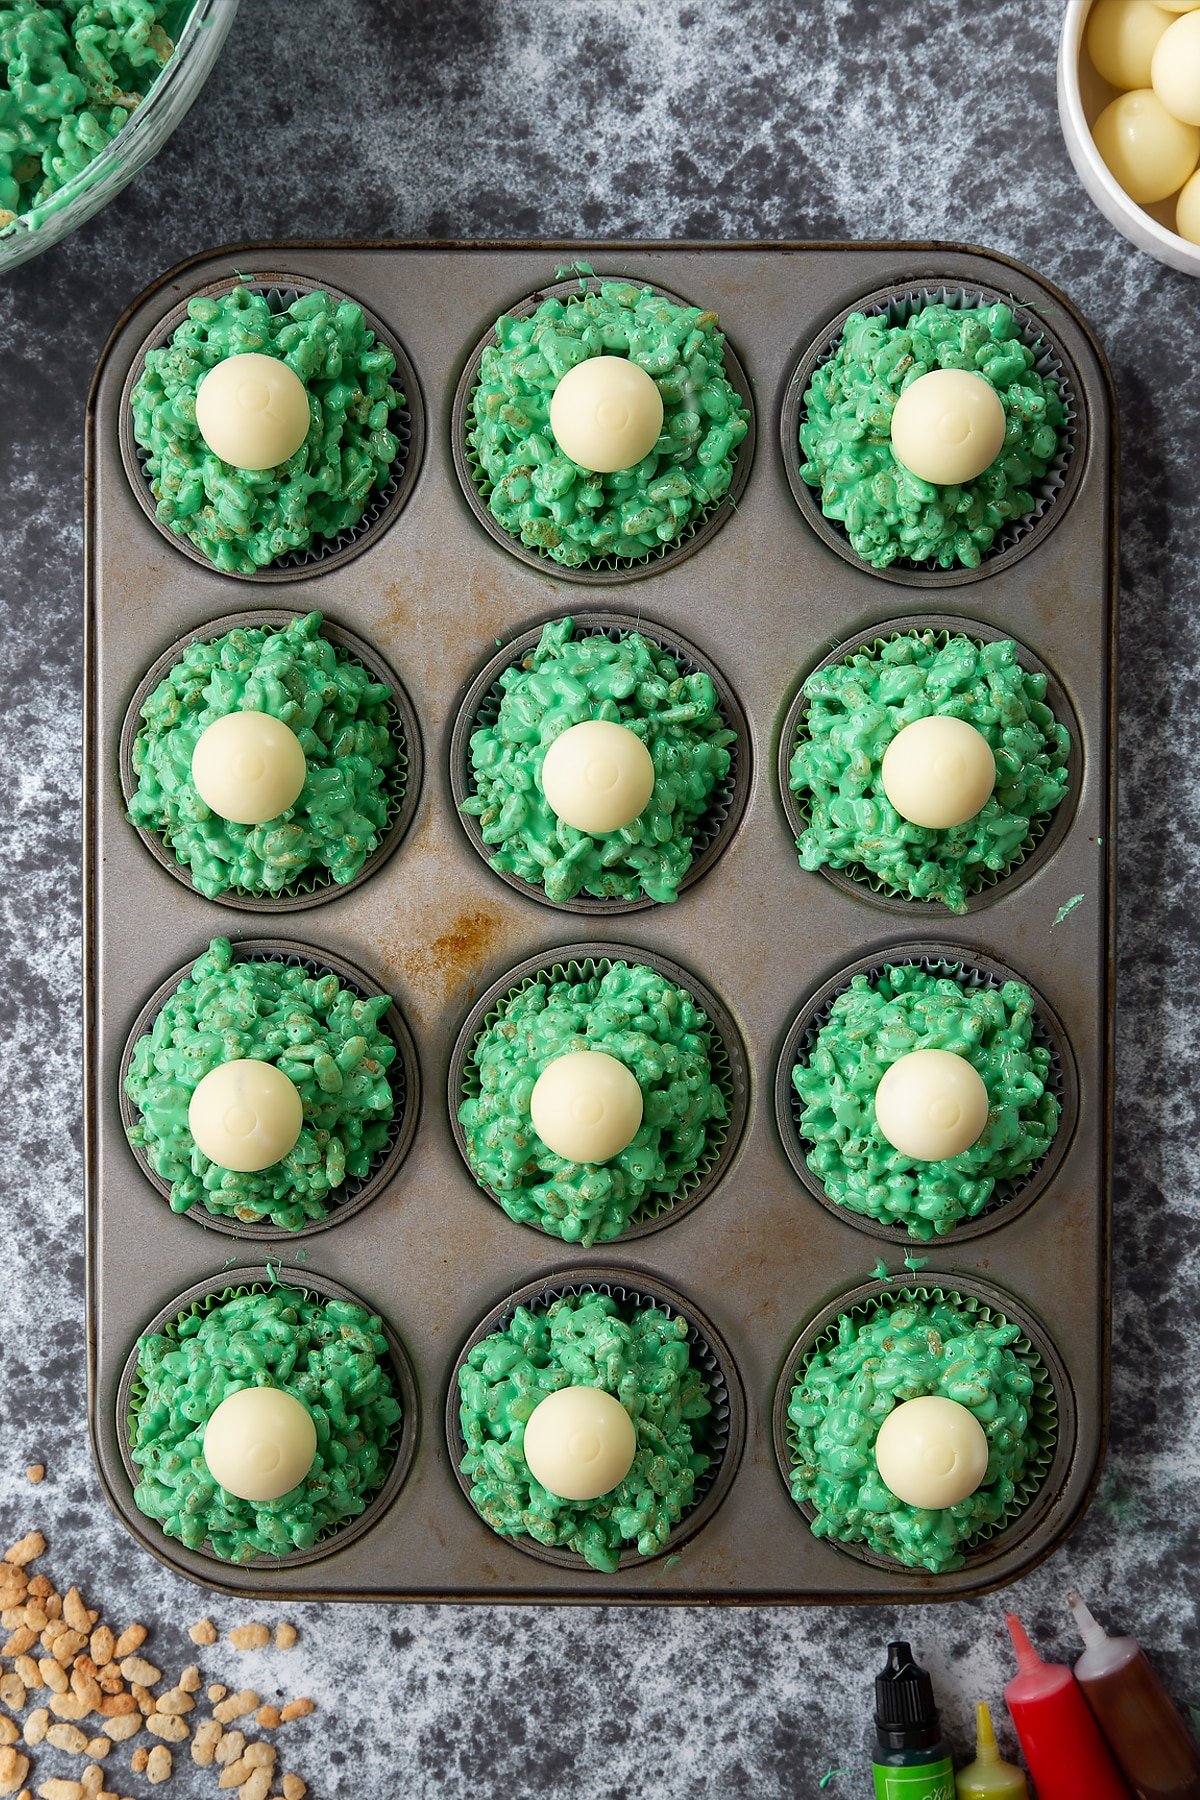 12-hole muffin tray lined with cupcake cases filled with green rice crispy treats topped with white chocolate spheres. Ingredients to make Halloween crispy cakes surround the tray.